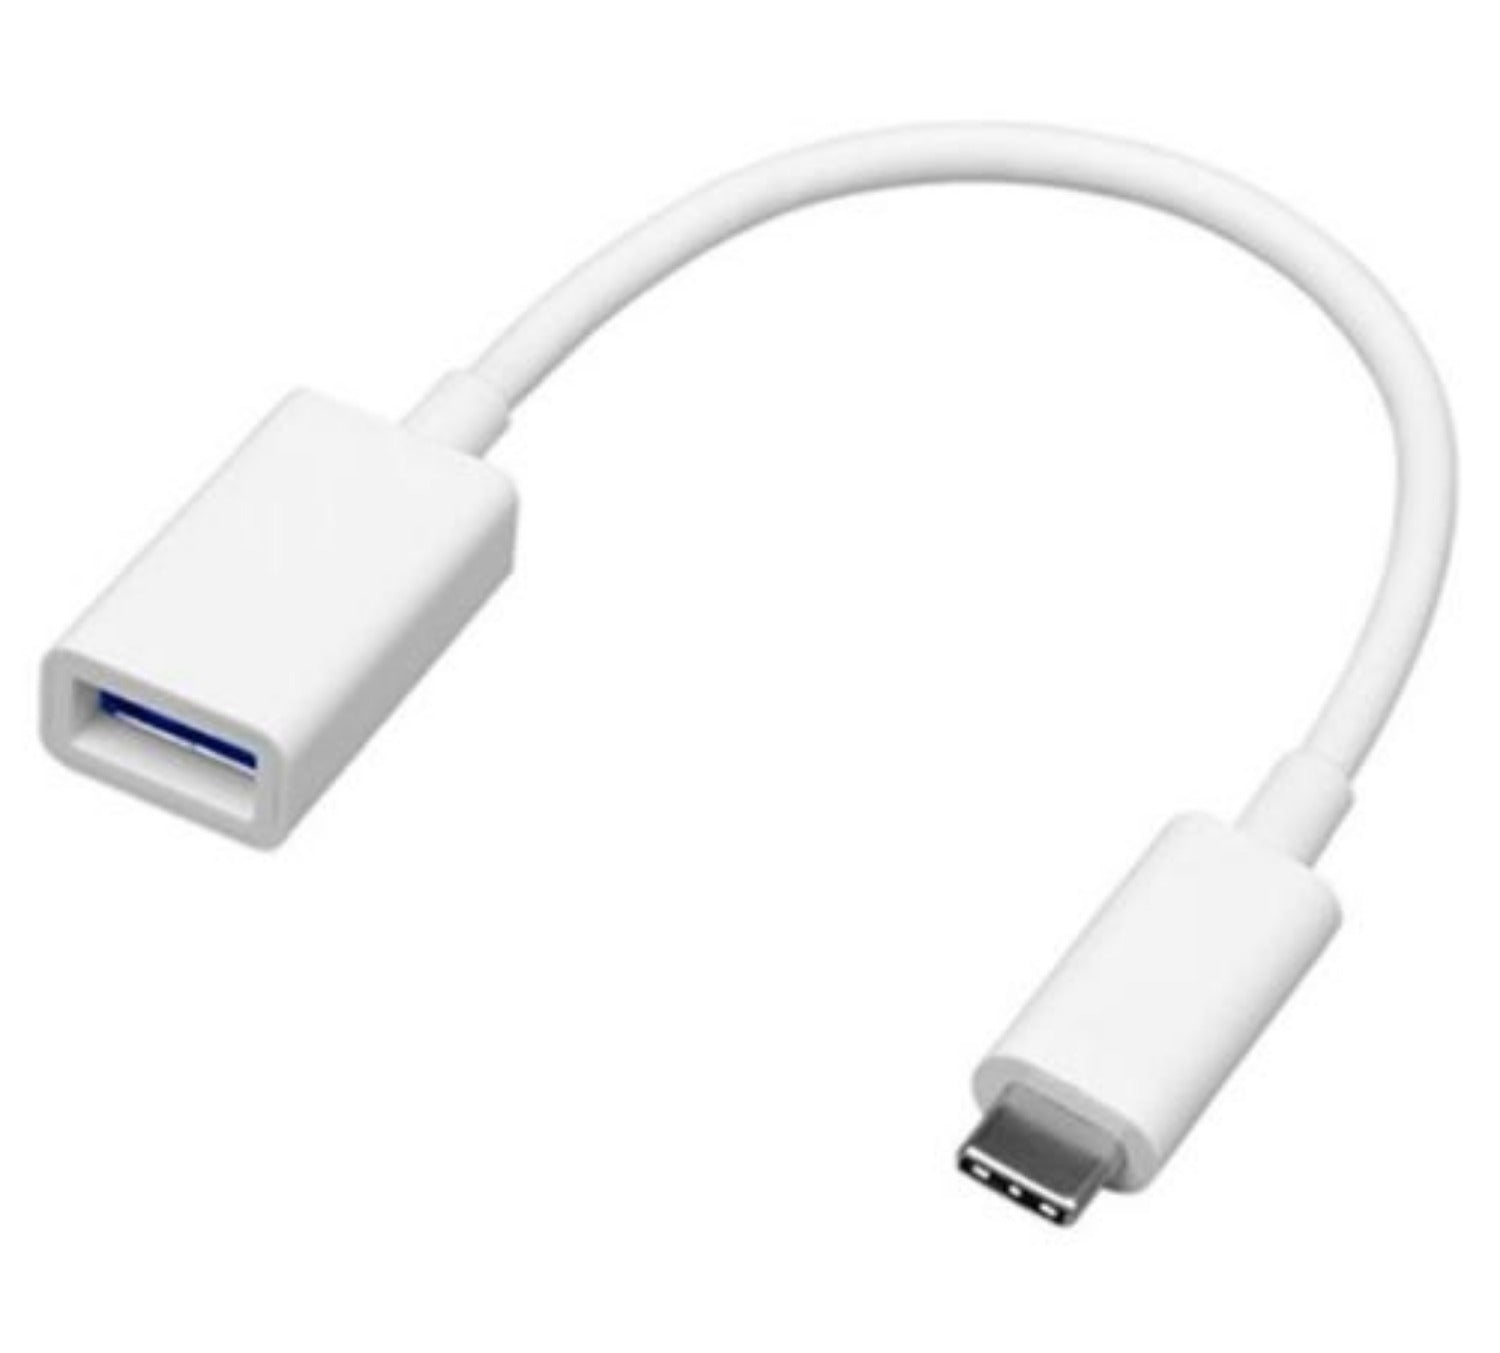 USB On-The-Go adapter for Type-C devices